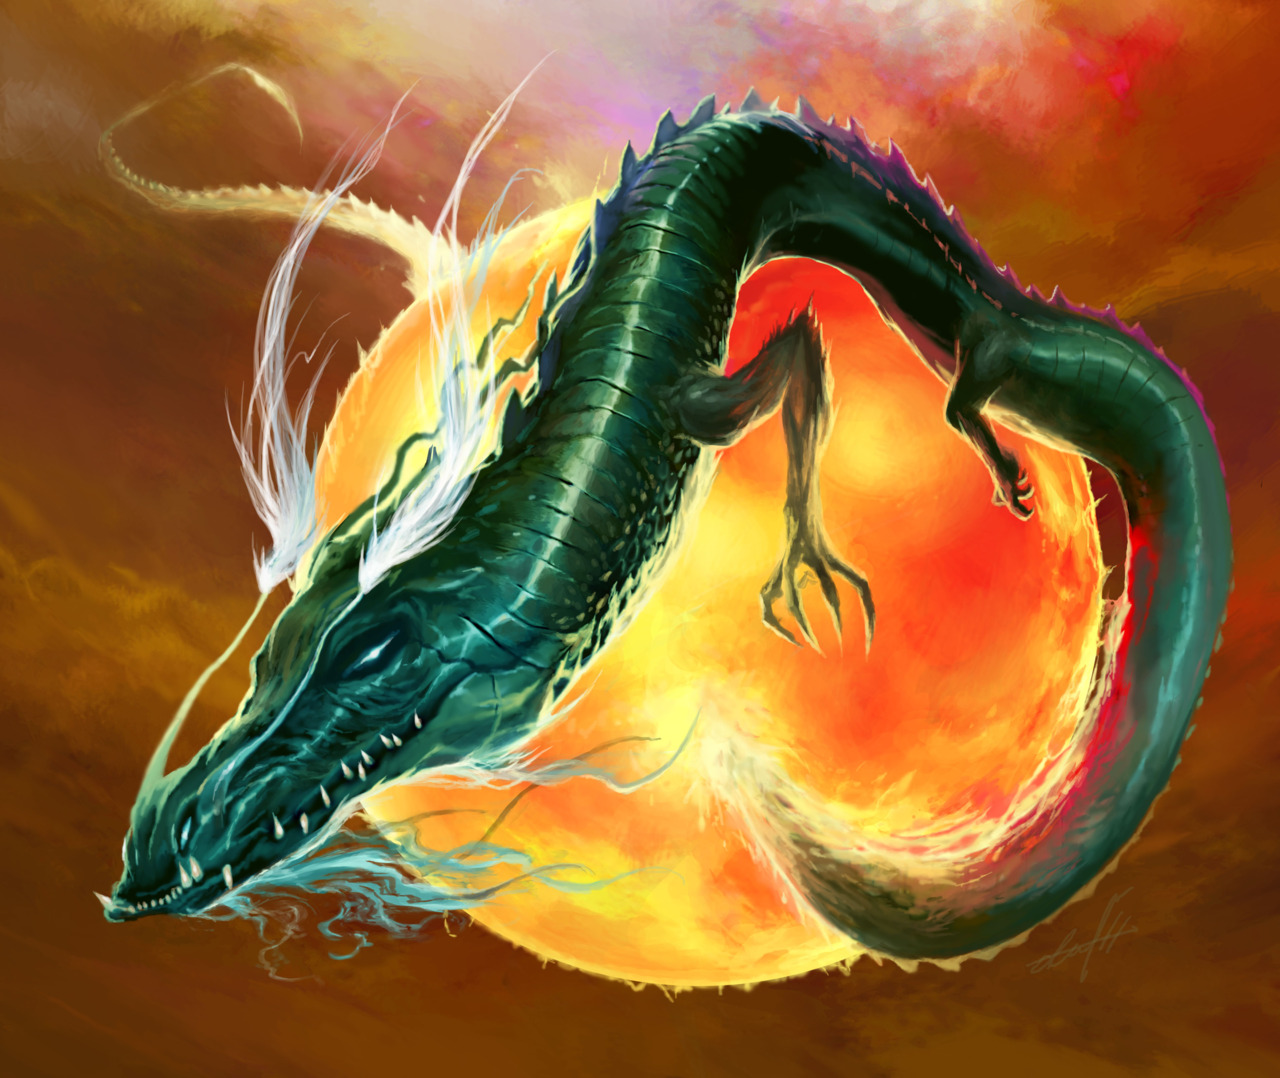 how to breed the jade dragon in dragon city